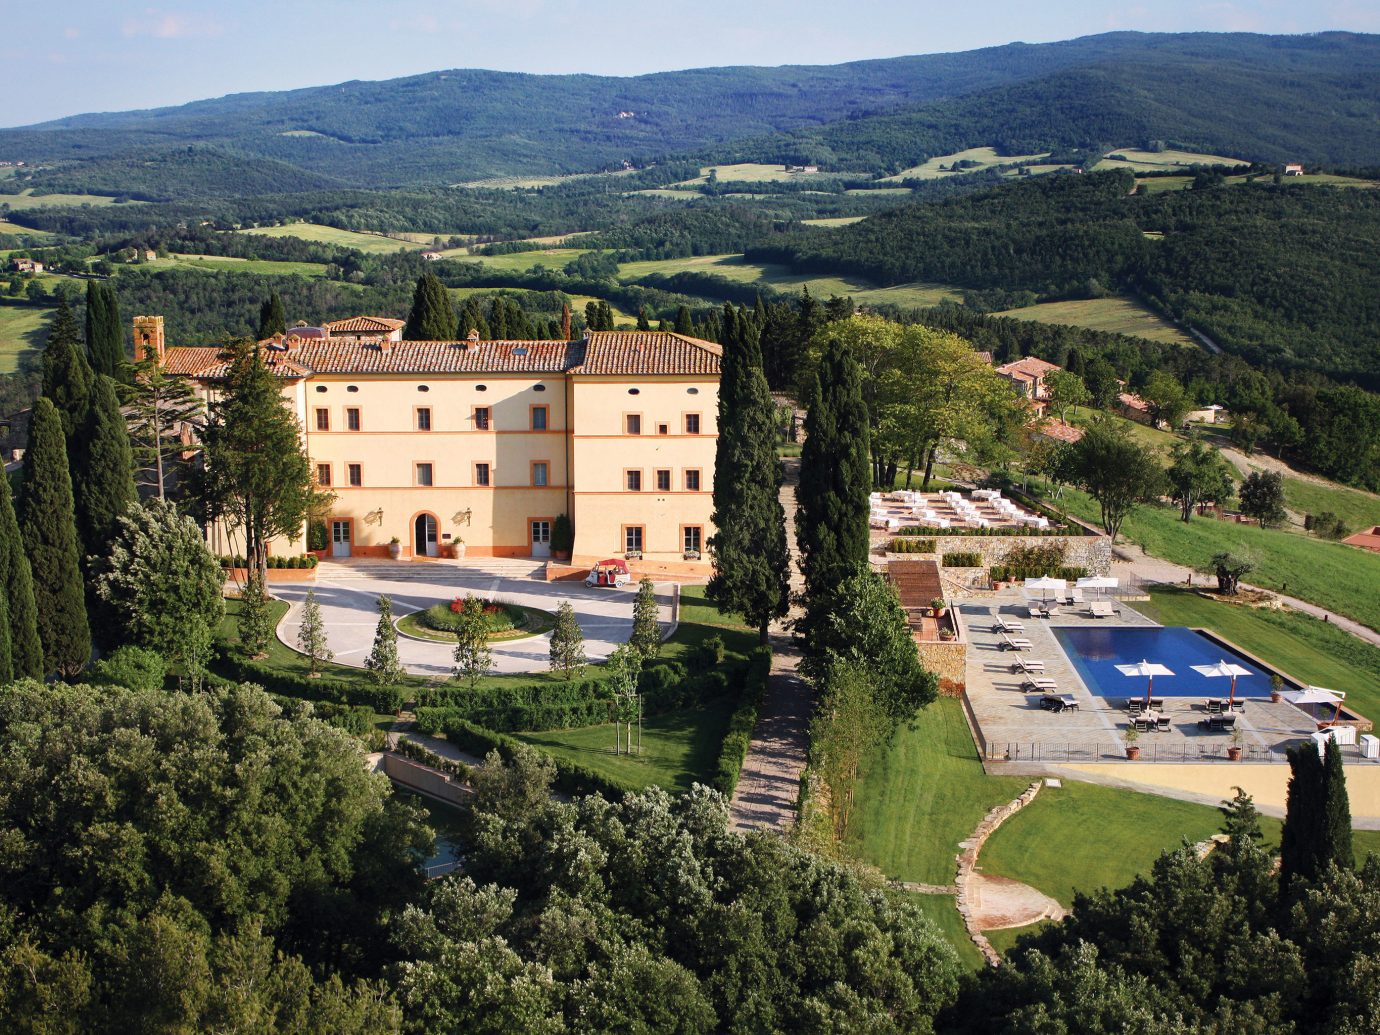 europe Hotels Italy Romance mountain tree outdoor grass sky aerial photography bird's eye view photography Town human settlement estate neighbourhood château Nature residential area hill hillside castle lush beautiful traveling